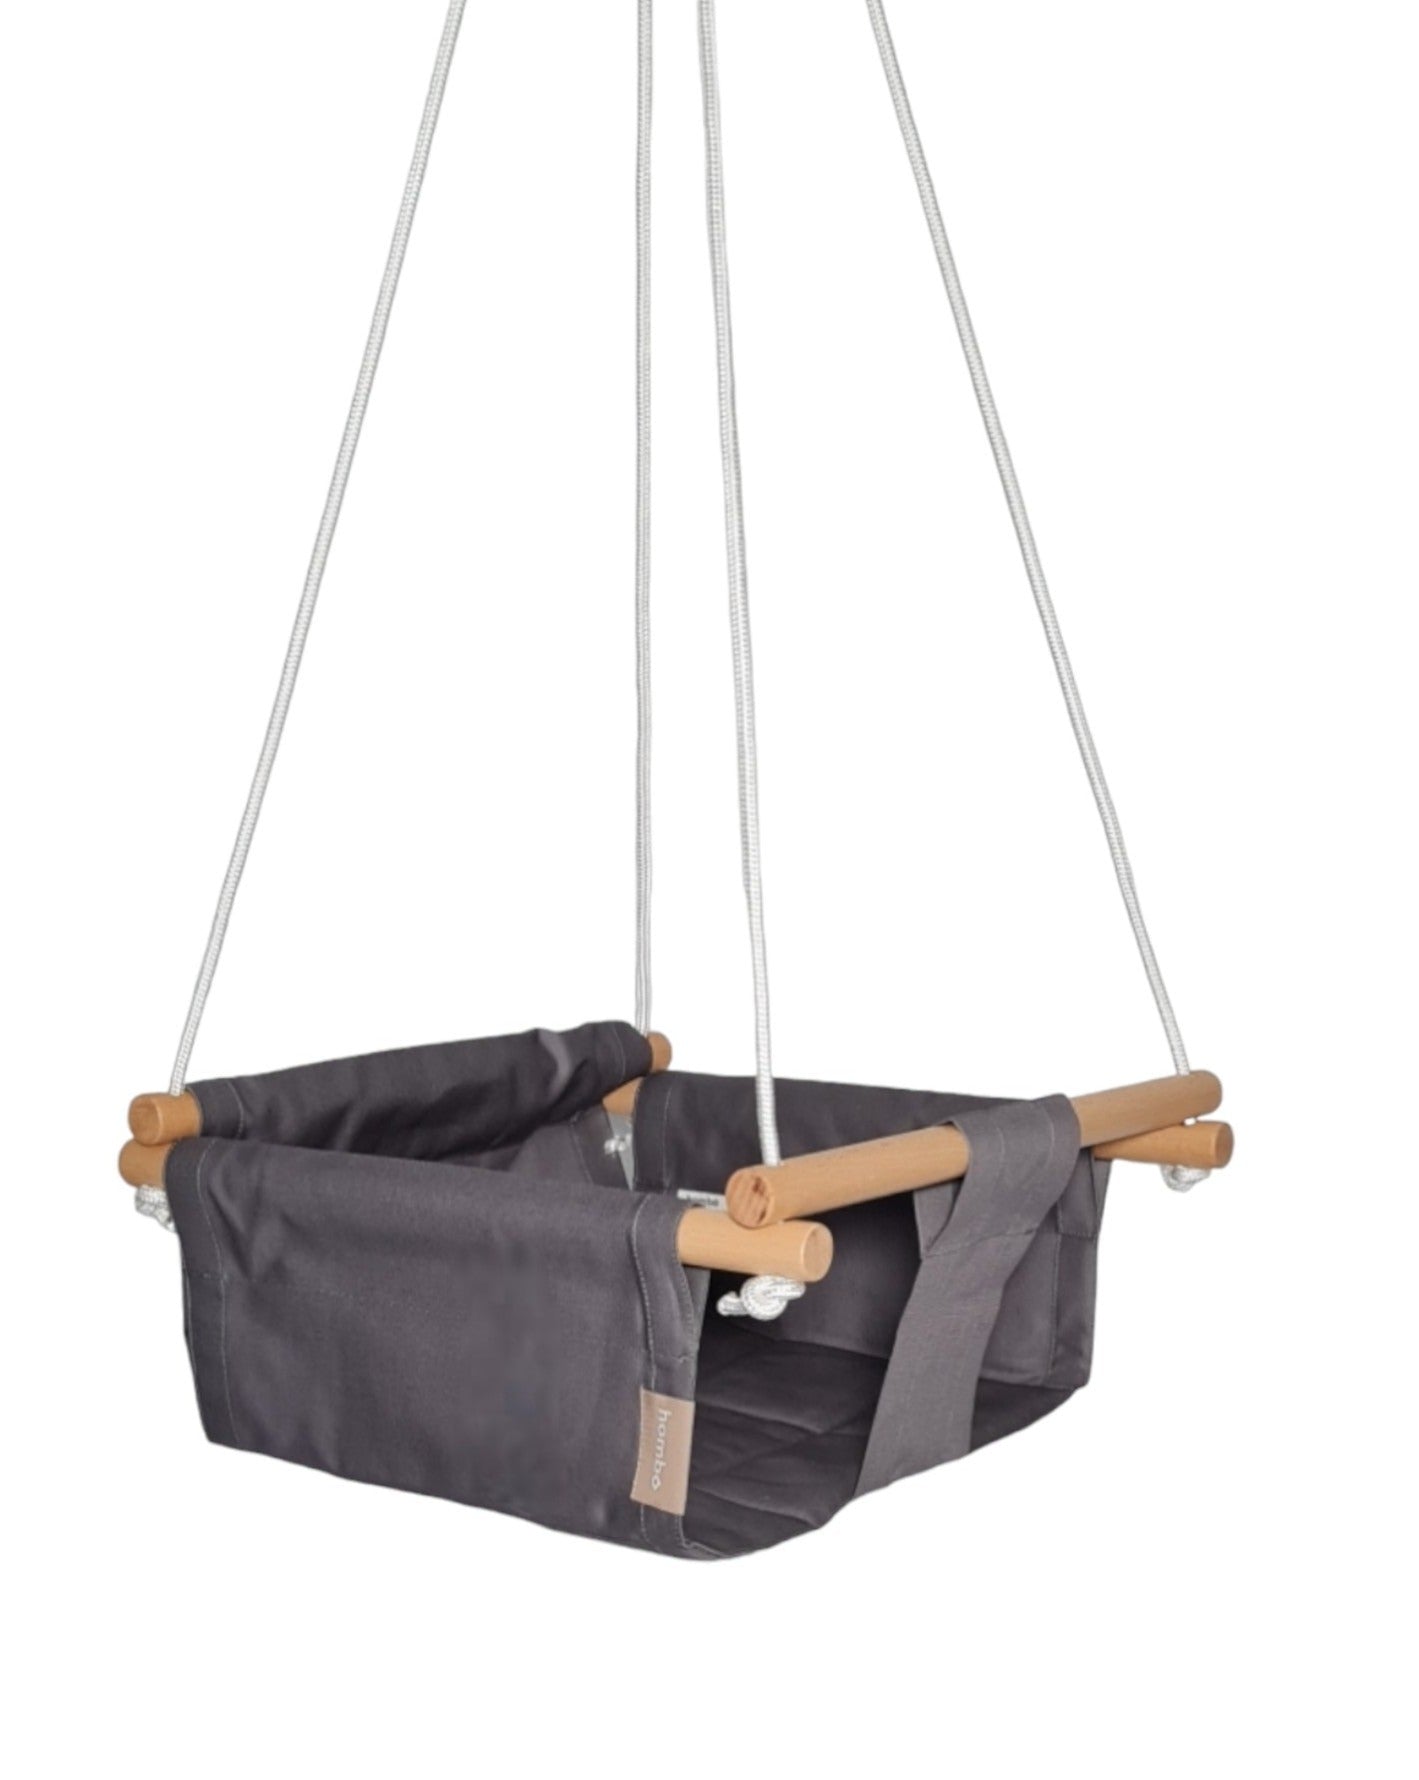 homba® kids cotton swing grey (from 6 months)